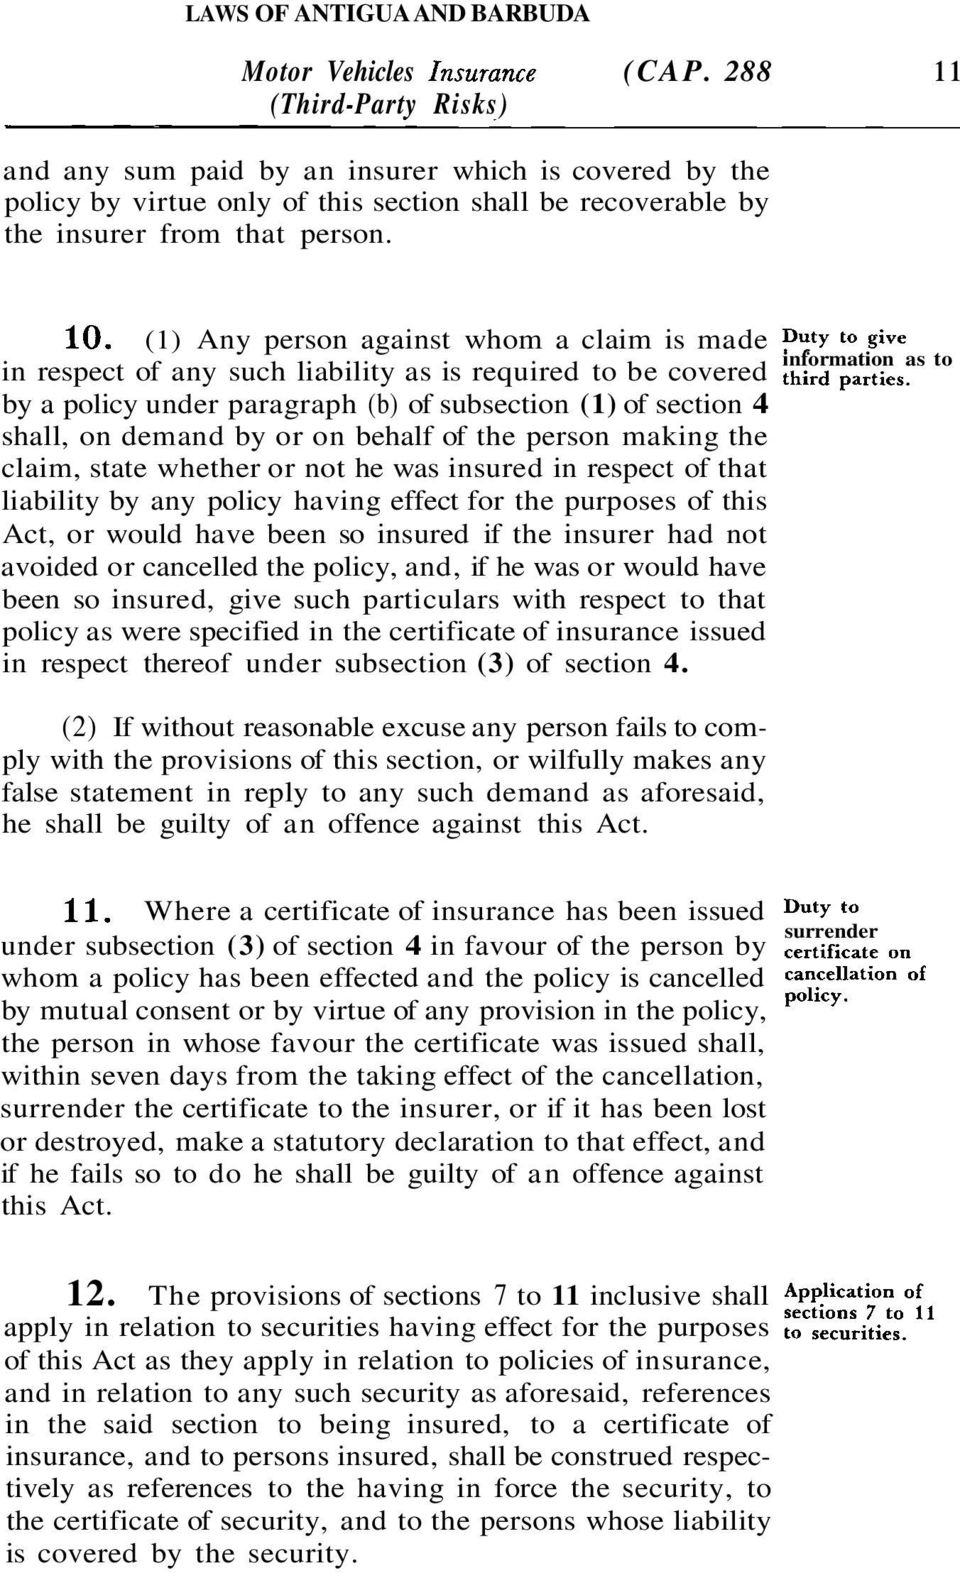 by a policy under paragraph (b) of subsection (1) of section 4 shall, on demand by or on behalf of the person making the claim, state whether or not he was insured in respect of that liability by any